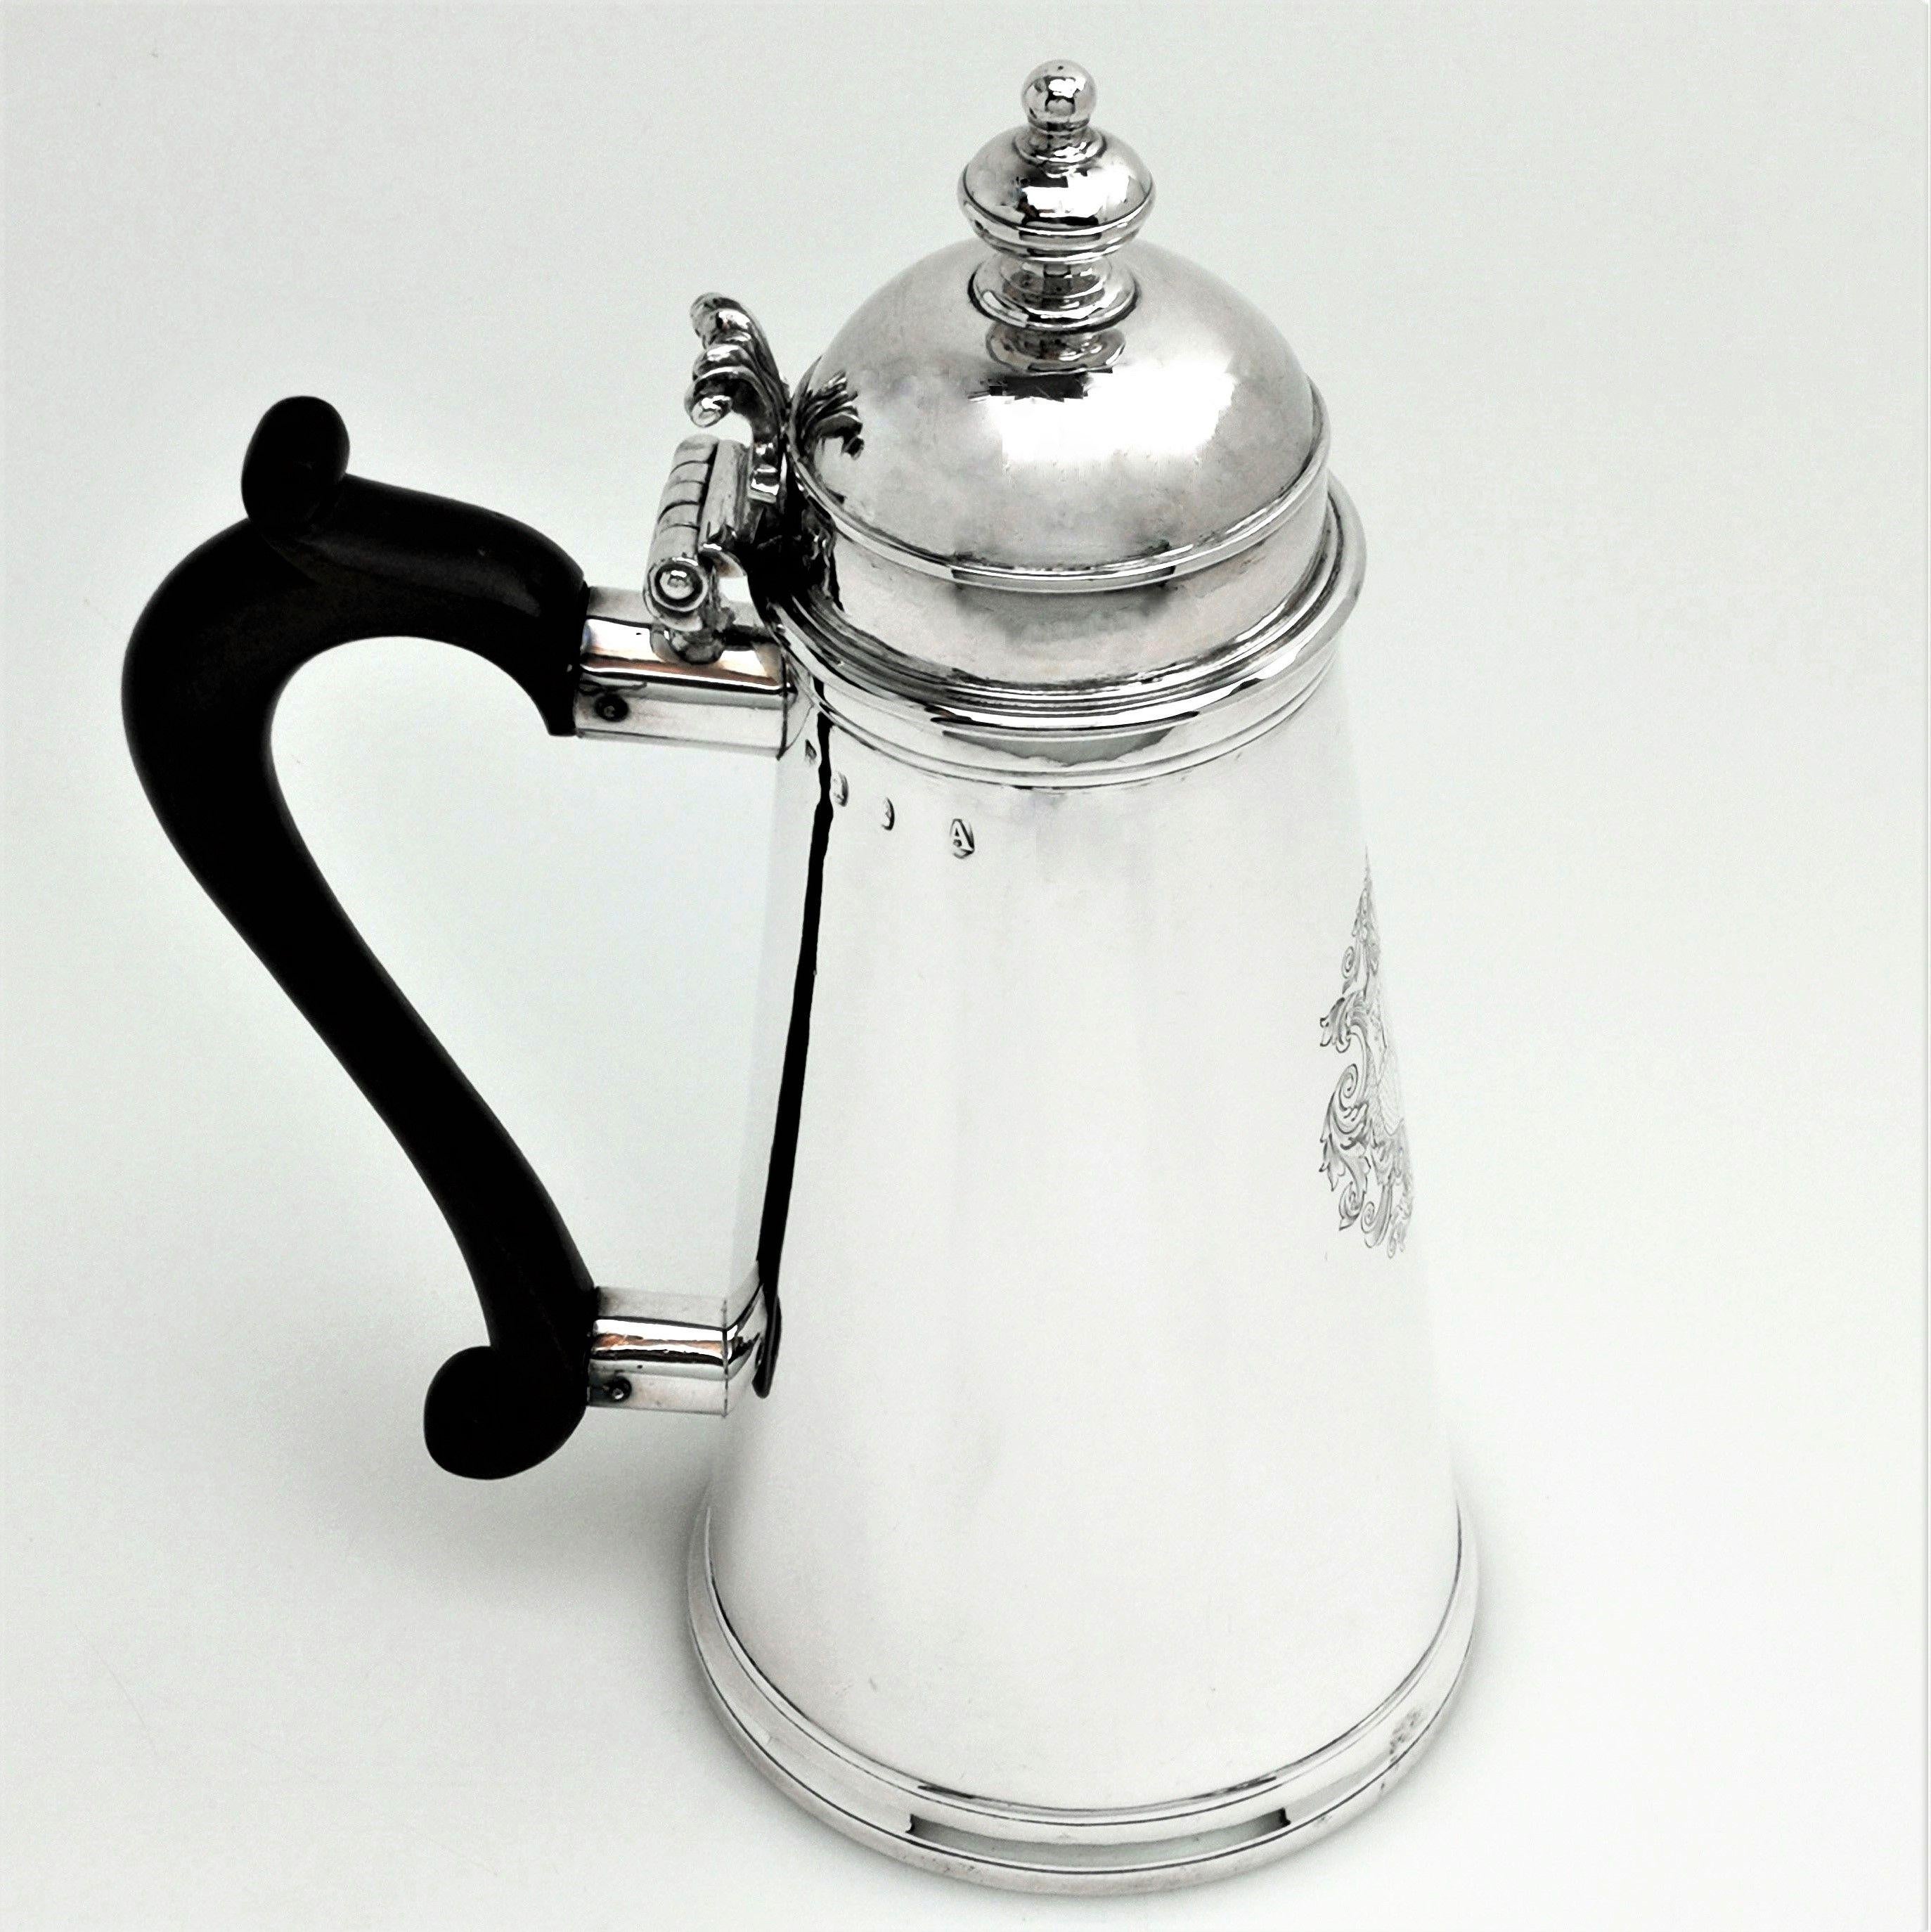 English Antique George I Sterling Silver Coffee Pot Side Handled 1716 Early Georgian